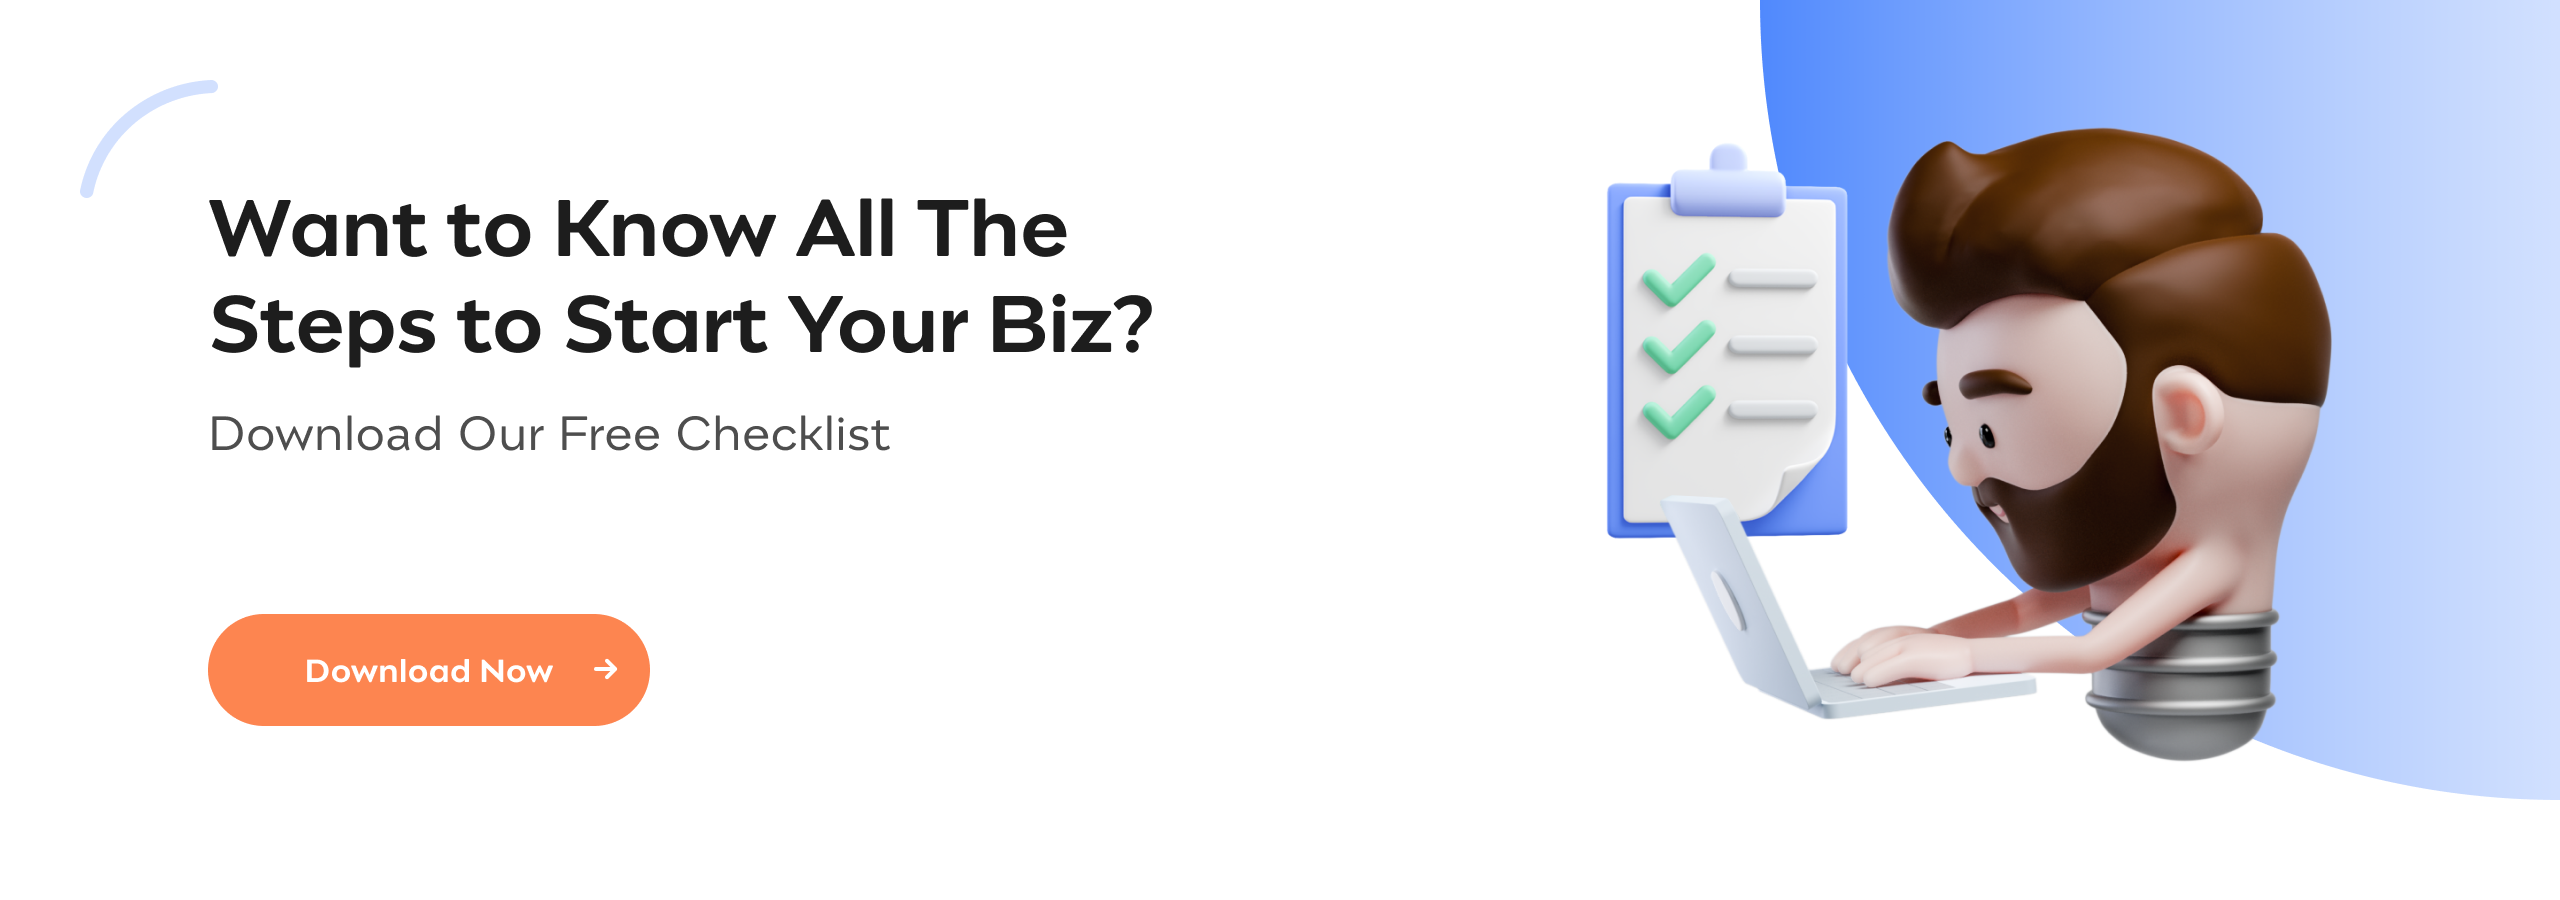 Want to Know All the Steps to Start Your Biz? Download Our Free Checklist.